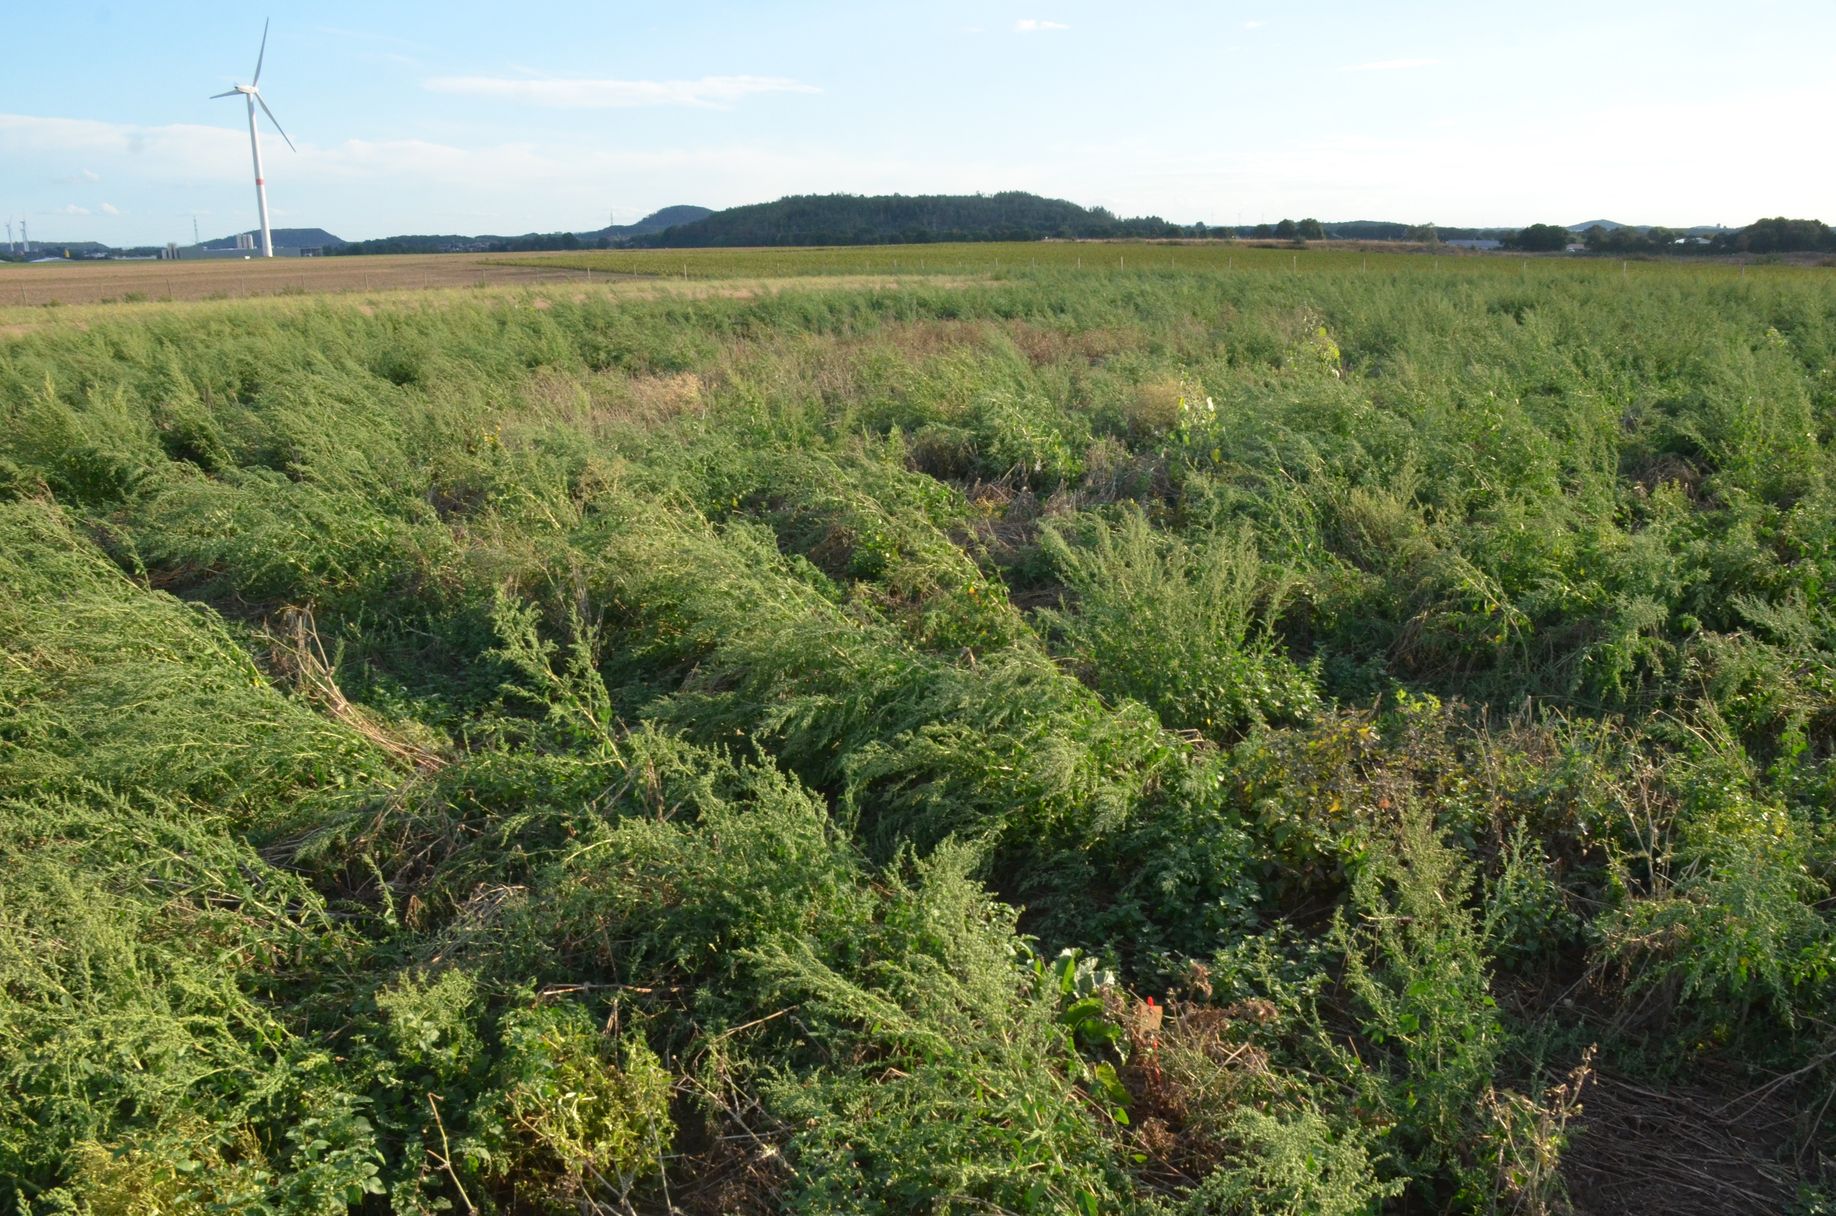 Many diverse weeds have already been removed from large areas of the fields due to competition and the high nutrient input.